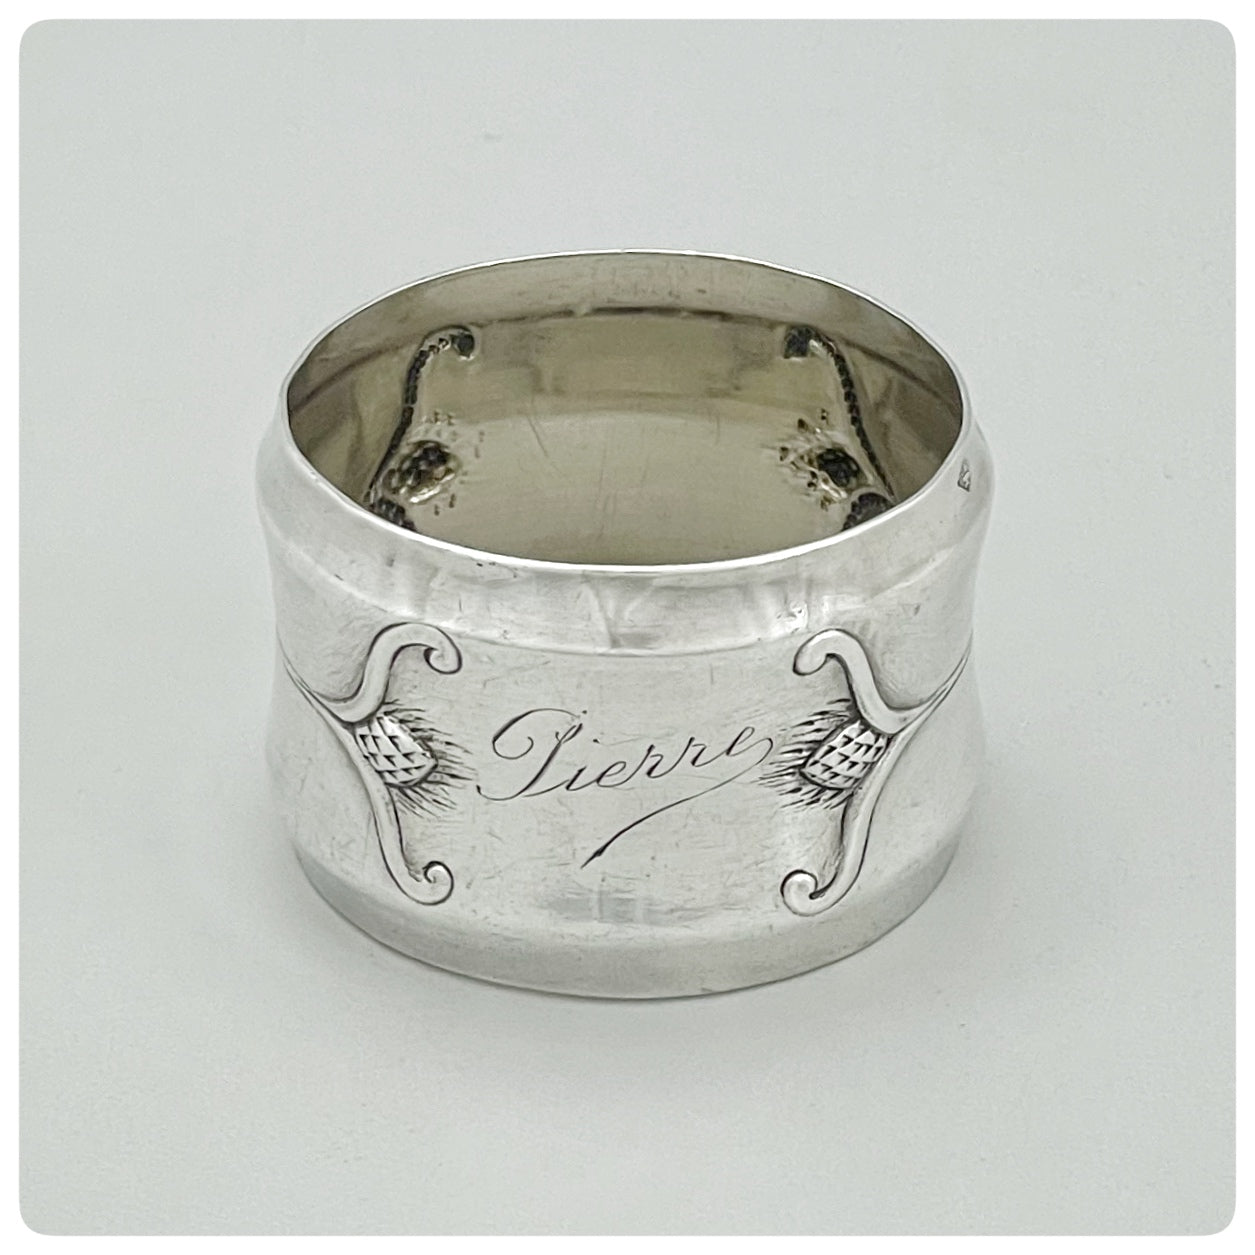 First Standard (950/1000) Solid Silver Napkin Ring, Paul Canaux, Paris, circa 1890 - The Silver Vault of Charleston